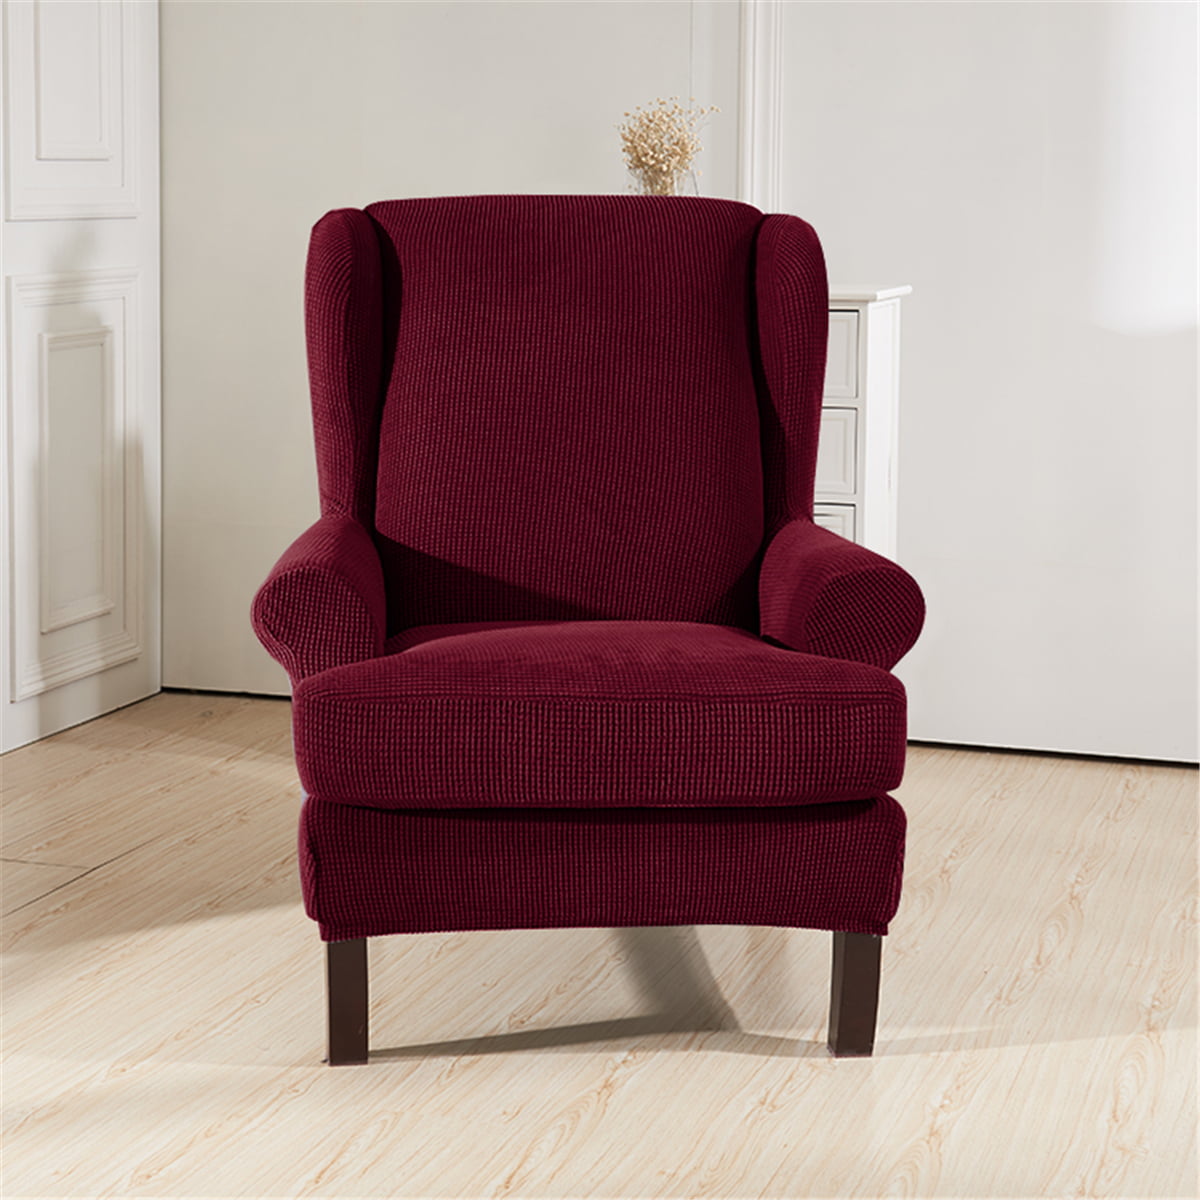 Color : I Armchair Wingback Chair Slipcovers Stretch 2-Piece Wing Chair Slipcovers with Cushion Cover Armchair Sofa Covers Fabric Elastic Armchair Slipcovers Furniture Protector